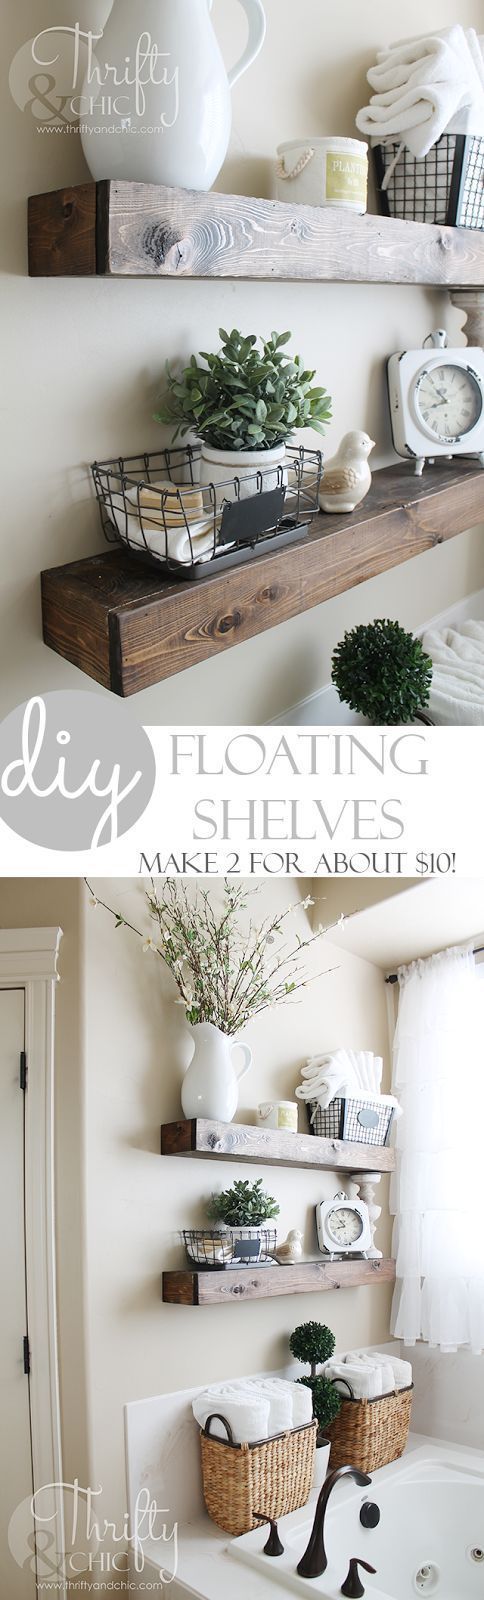 DIY Floating Shelves just like the ones from Fixer Upper! Make 2 of these for abou